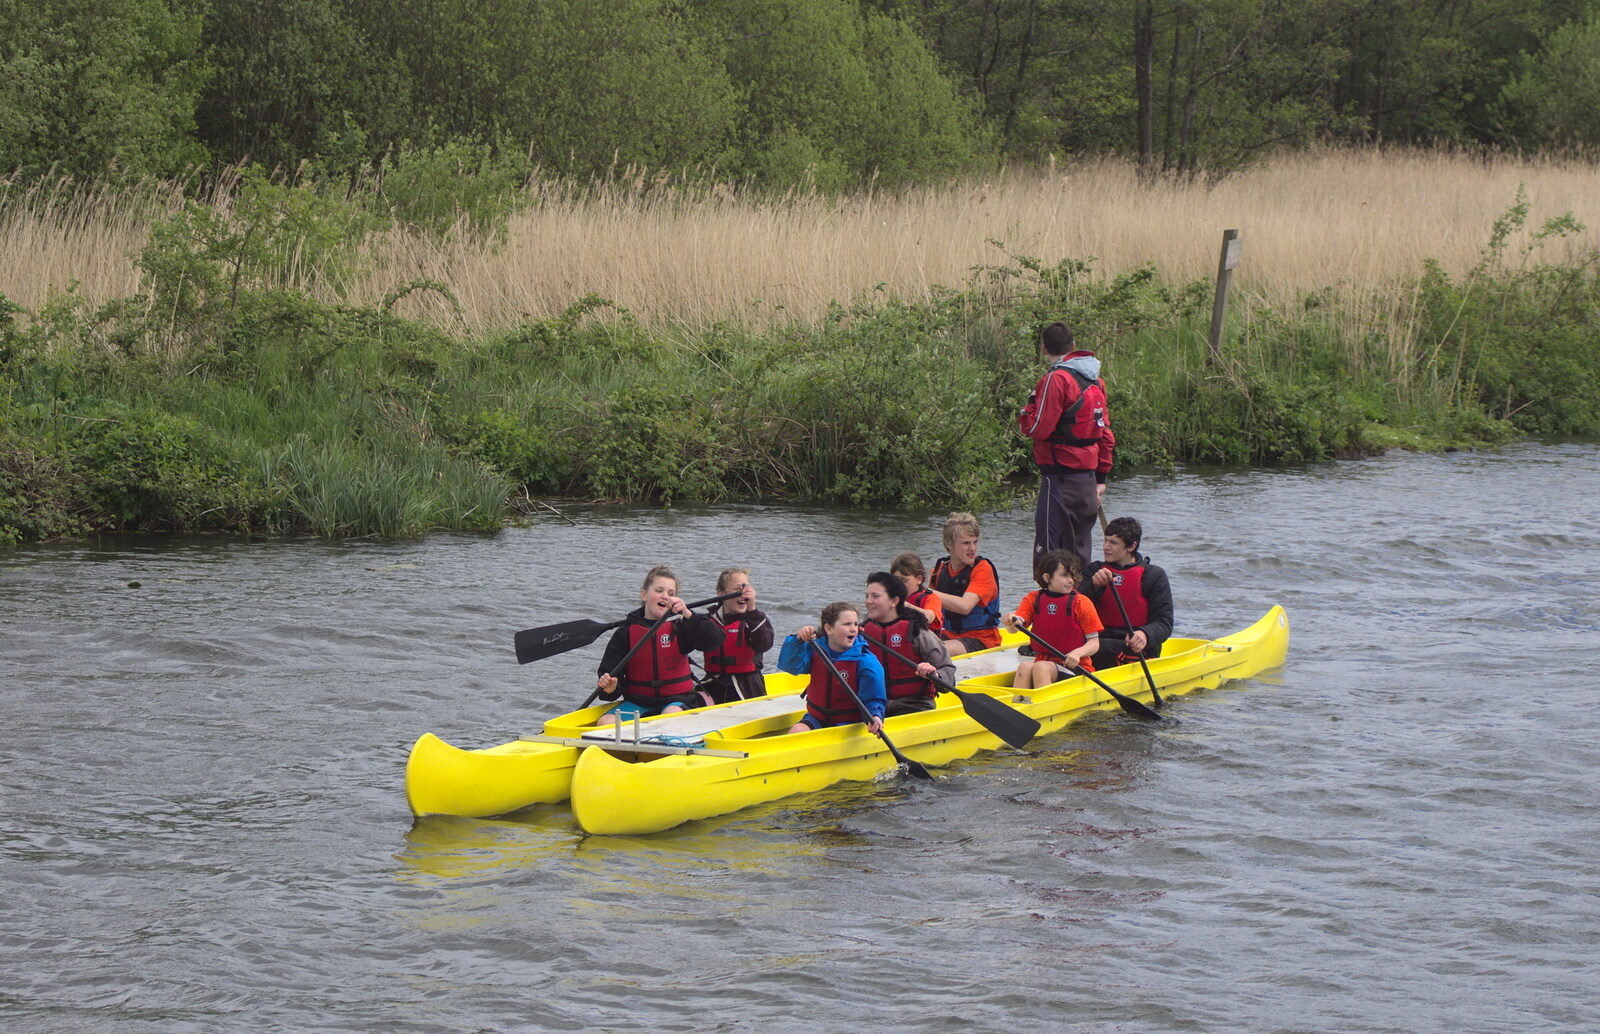 Teenagers paddle a canoe singing 'Summer Holiday' from A Trip on the Norfolk Broads, Wroxham, Norfolk - 25th May 2013